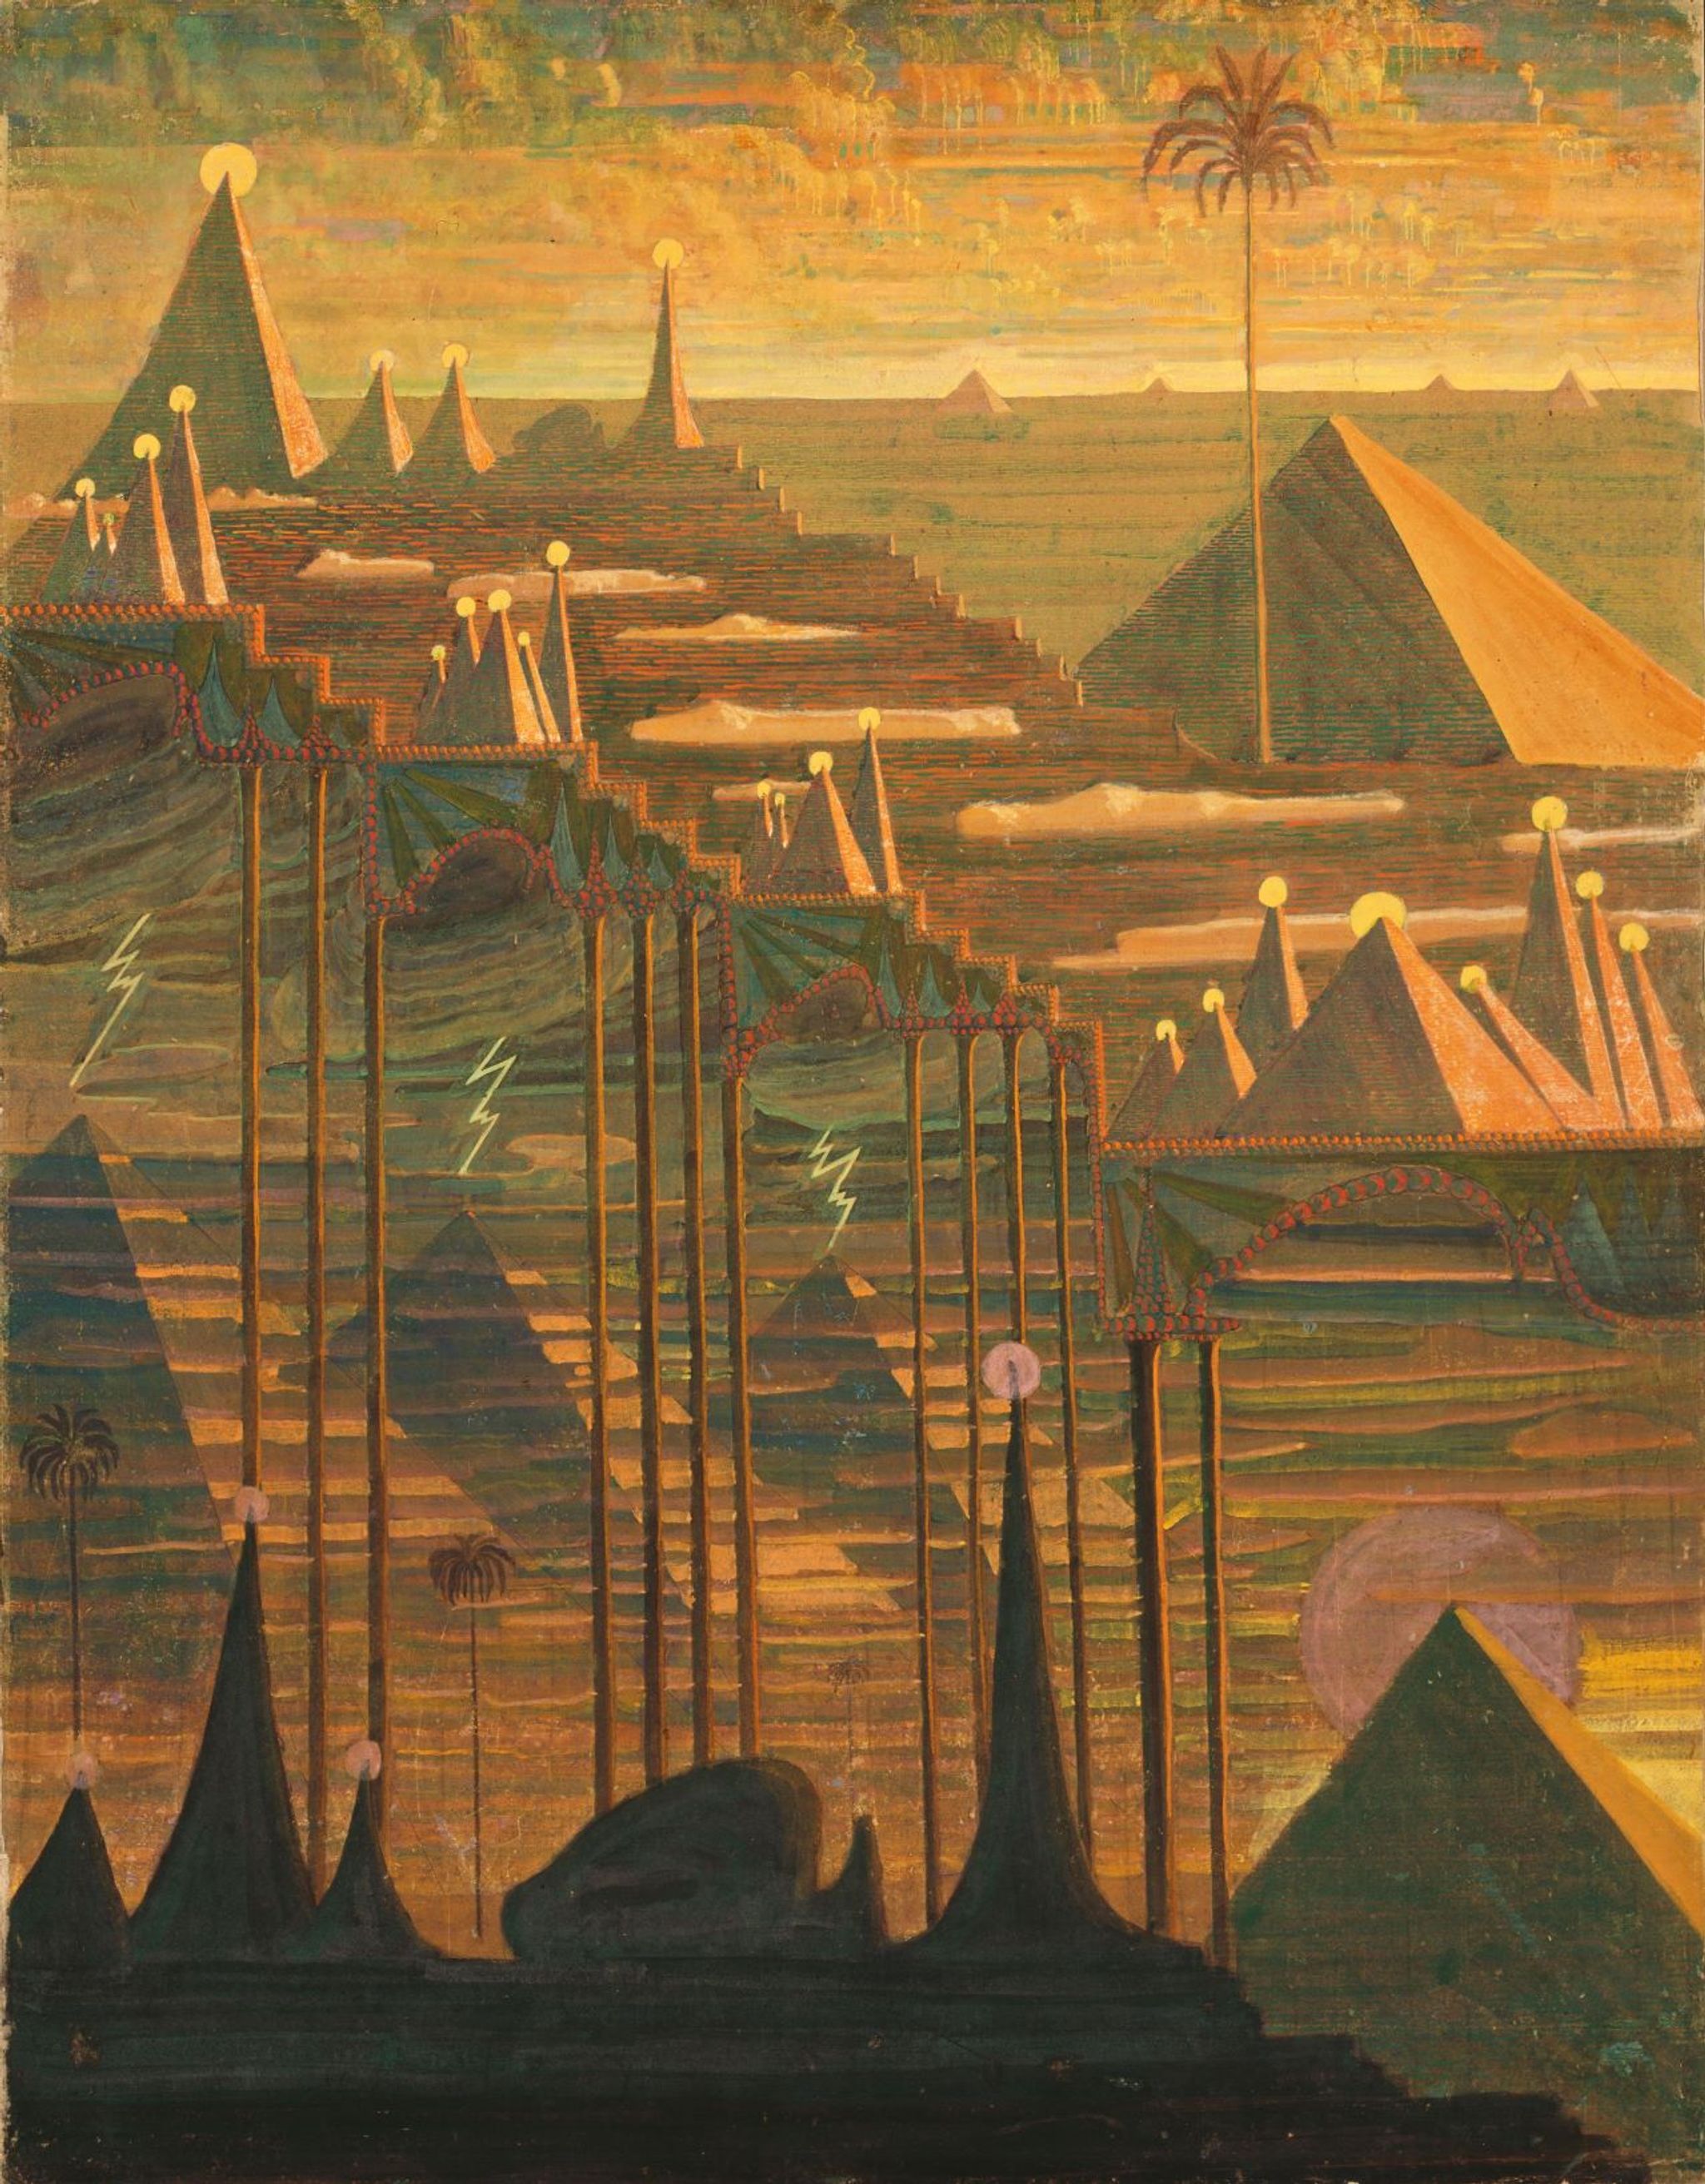 a painting of pyramids and a bridge